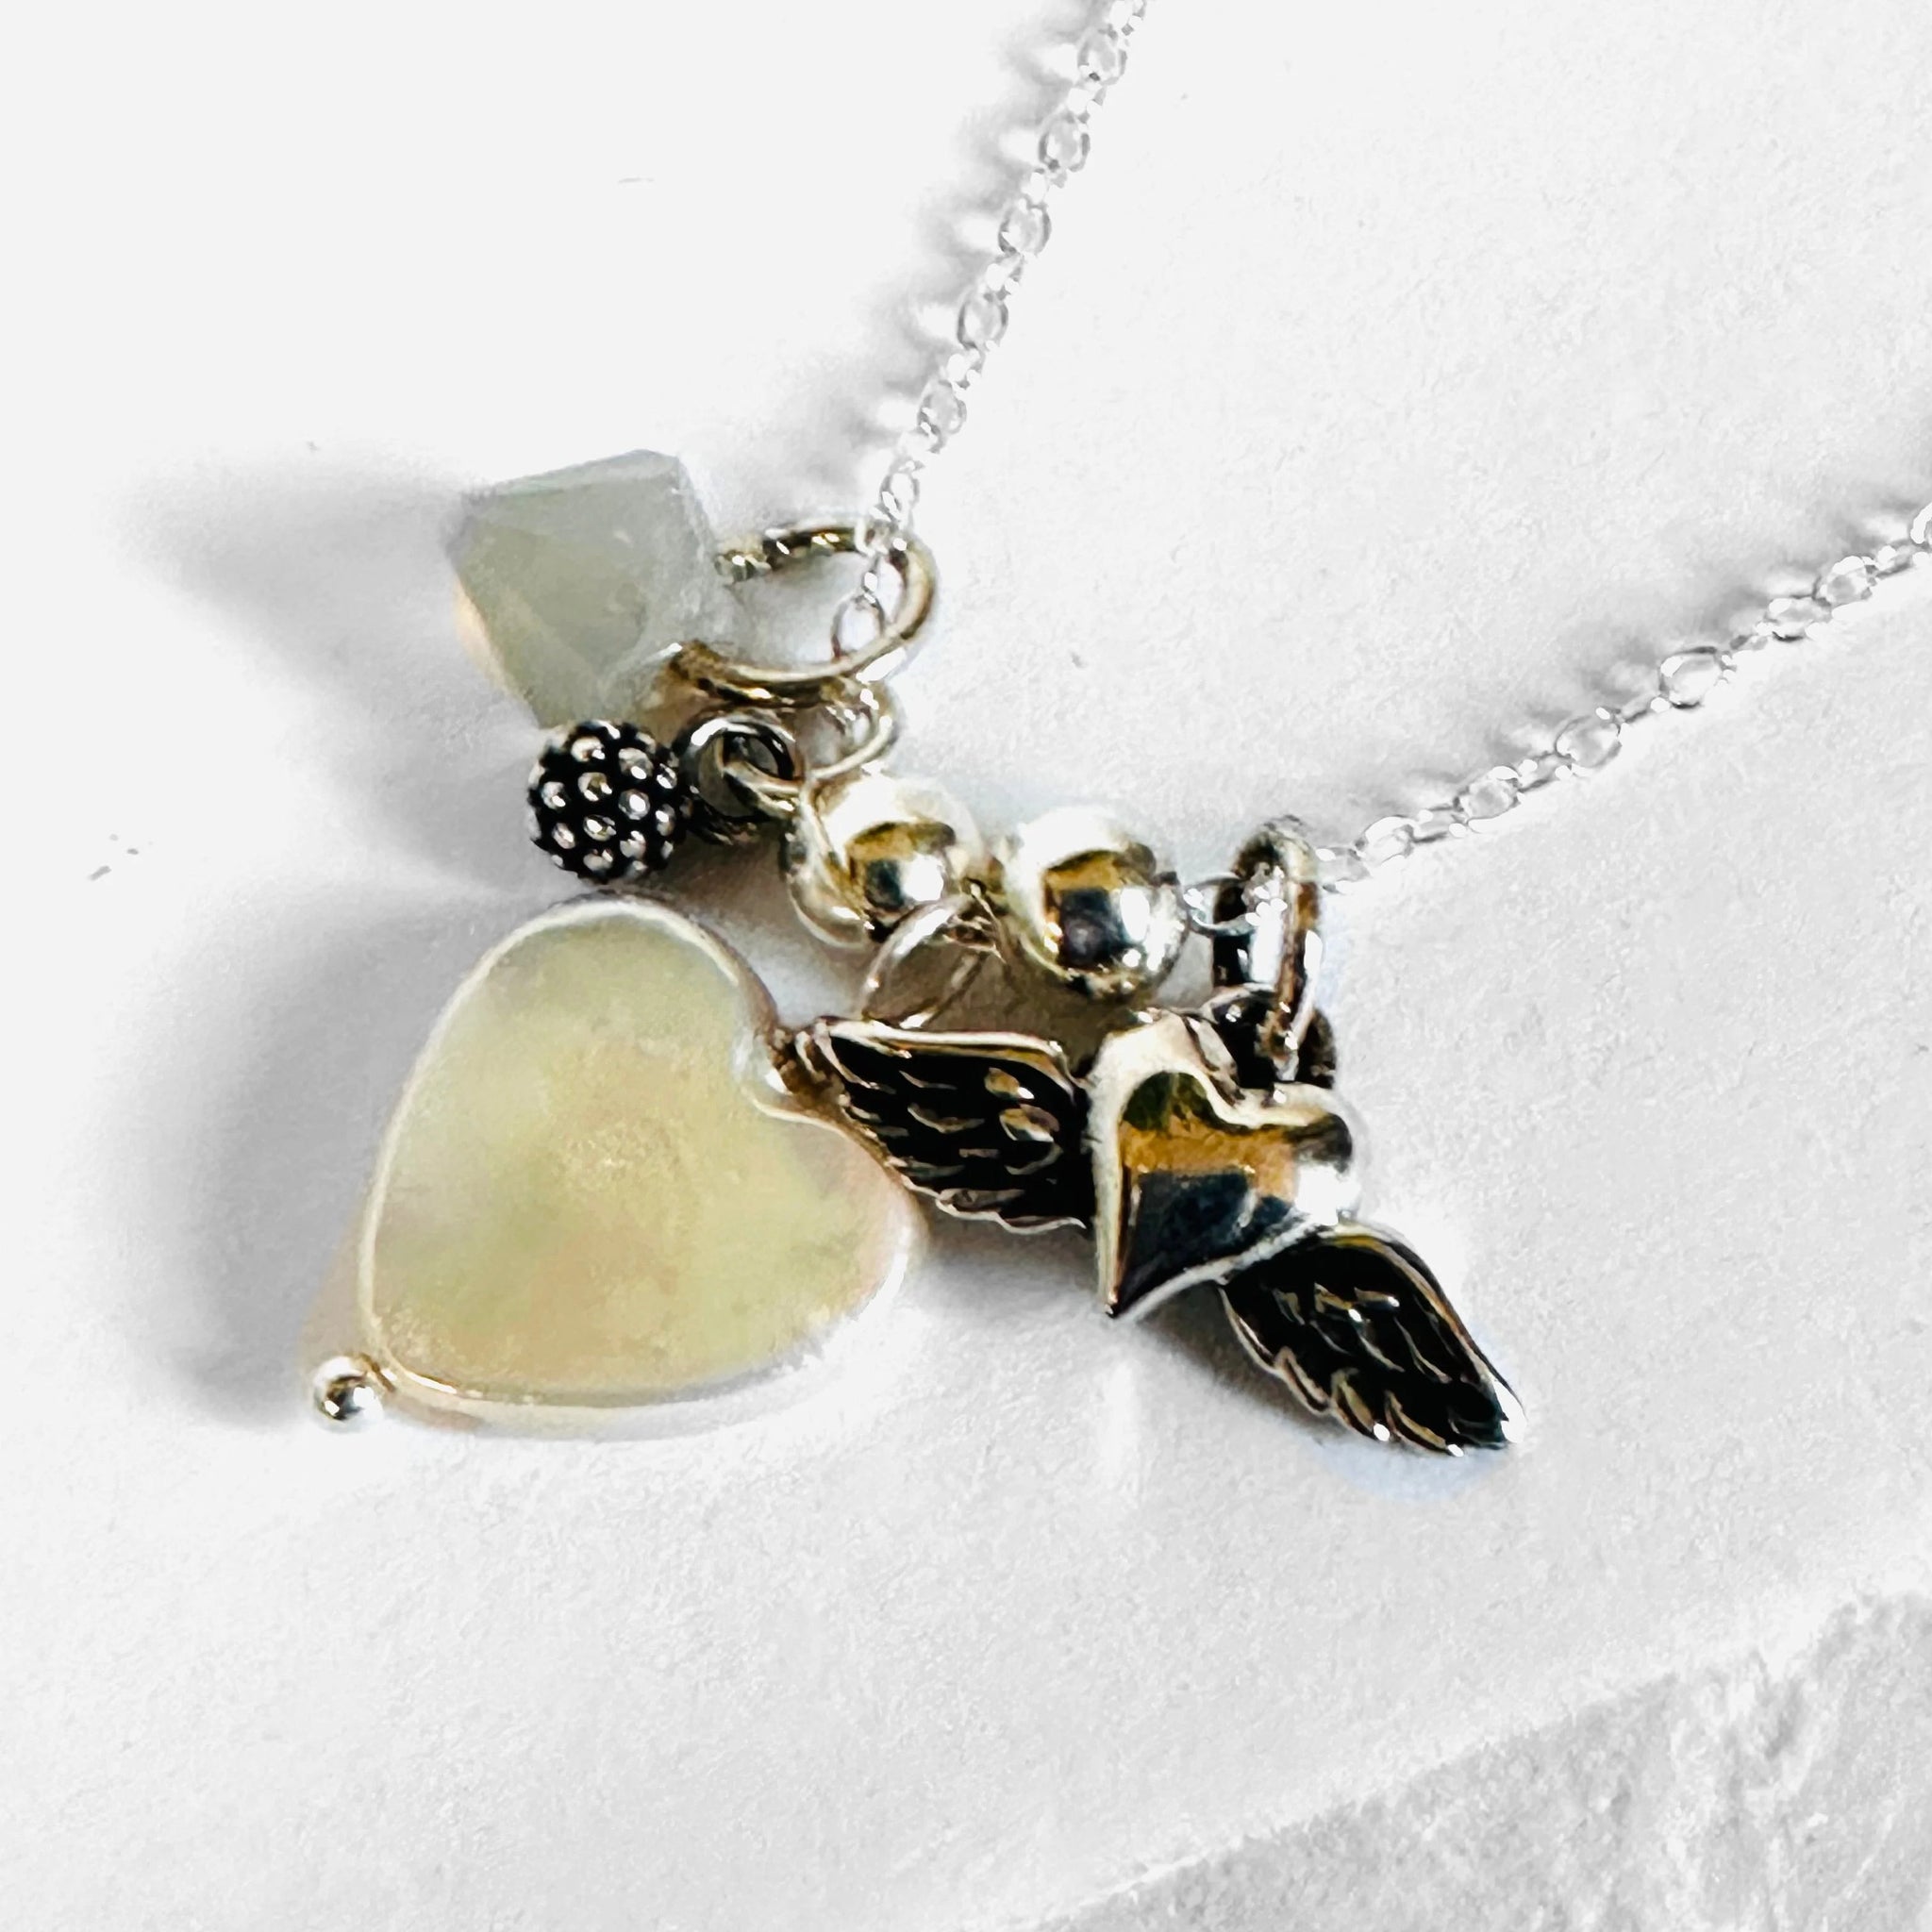 Charm Necklace, Pearl Heart Necklace, Sterling Silver Necklace Janine Gerade